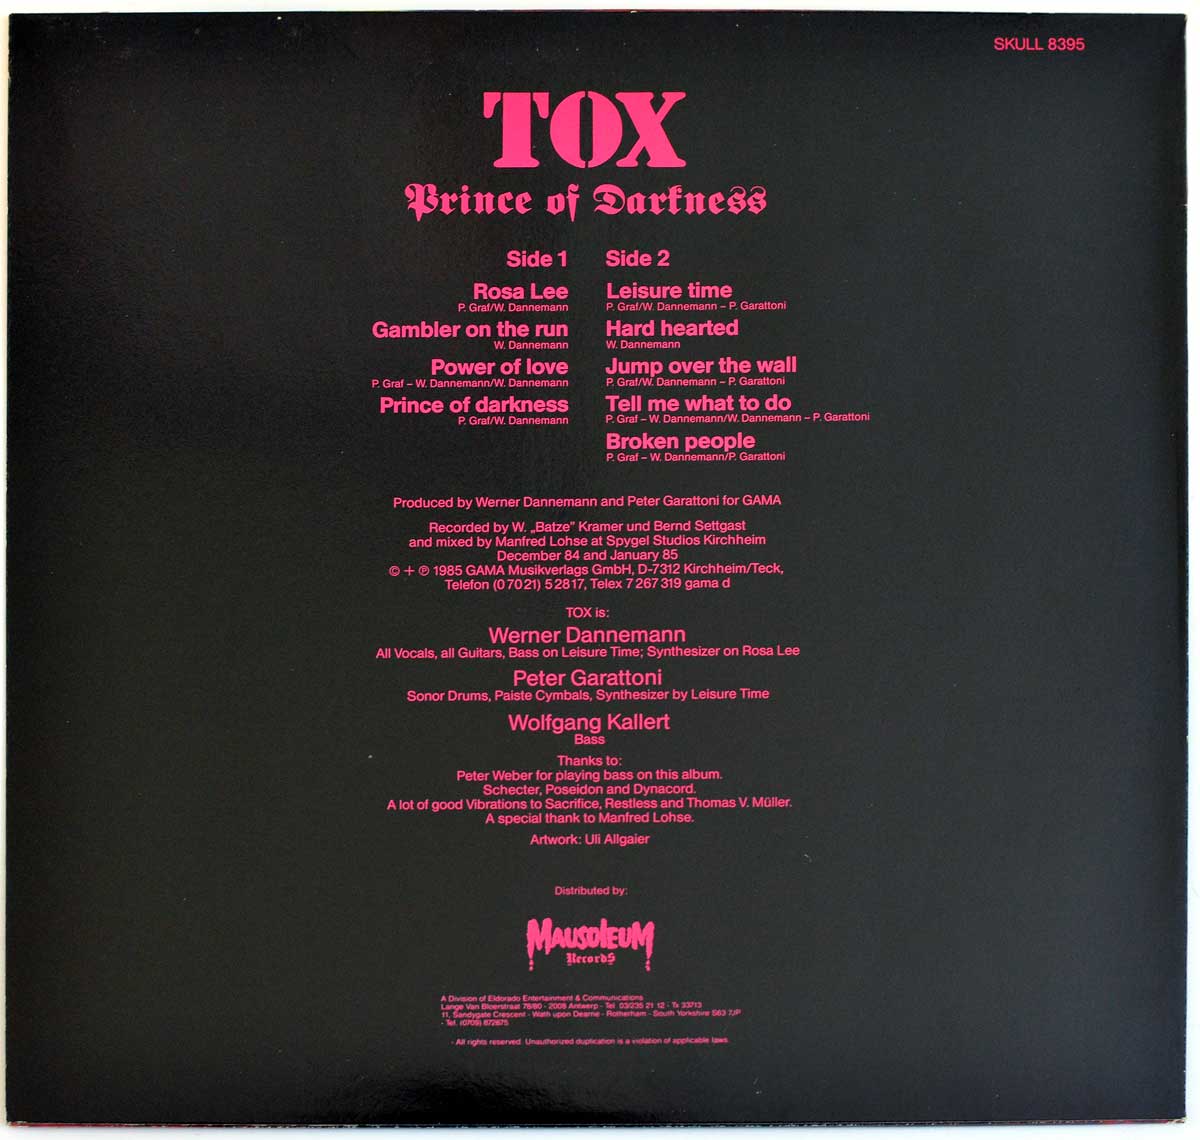 Album Back Cover  Photo of "TOX - Prince Of Darkness Skull"